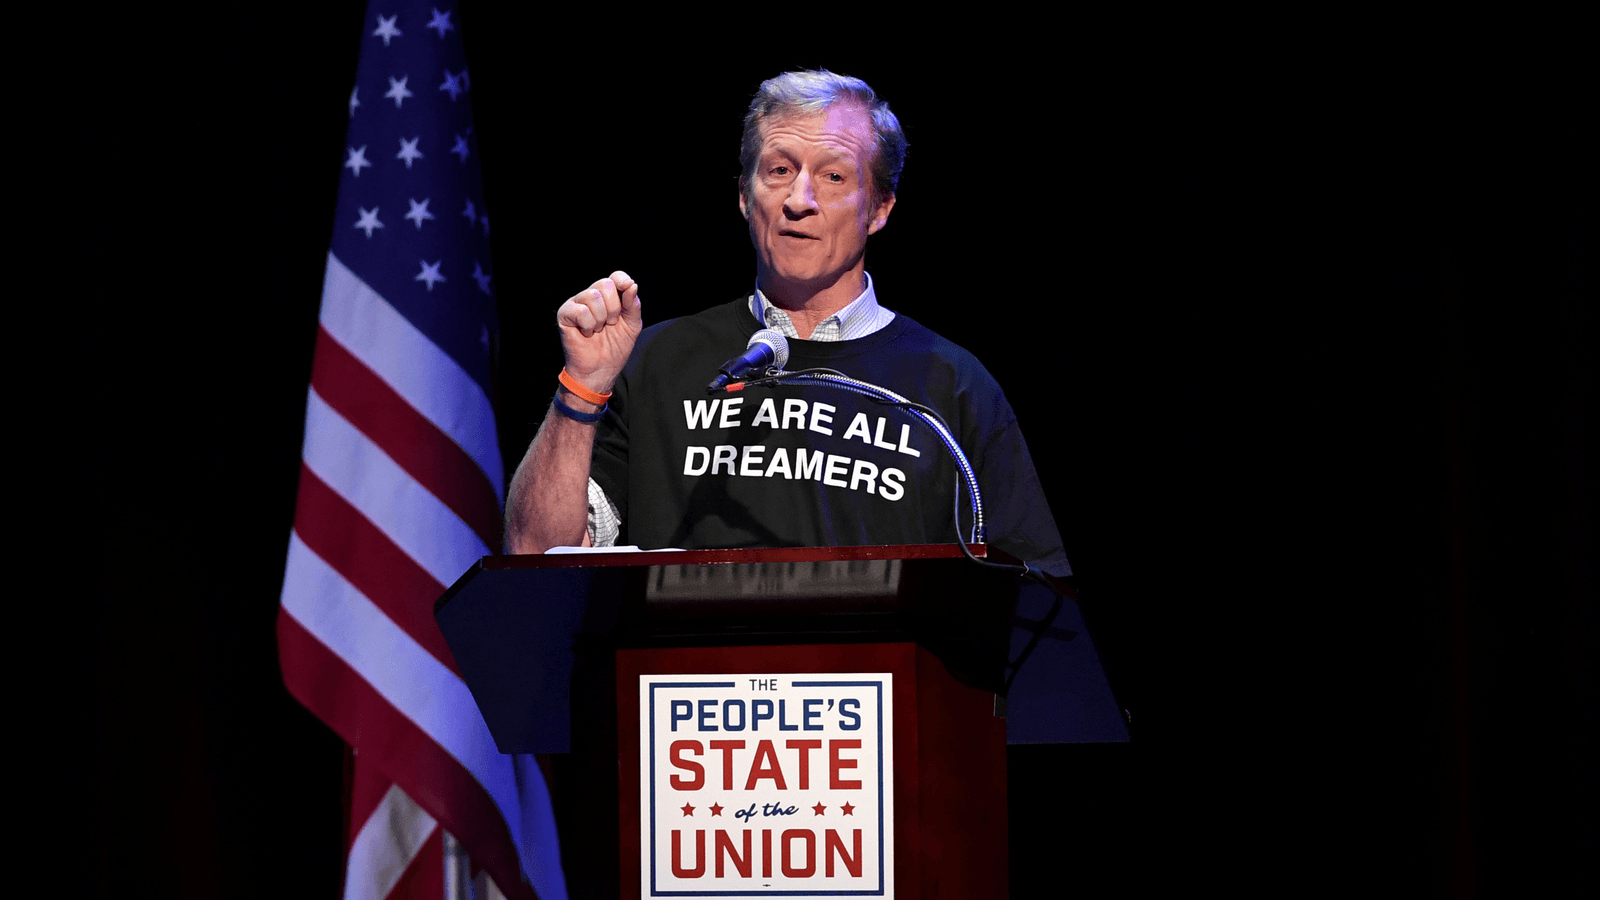 Tom Steyer speaks during the "People's State of the Union" event one day ahead of President Trump's State of The Union Speech to Congress, in Manhattan, New York, Jan. 29, 2018. Darren Ornitz/Reuters